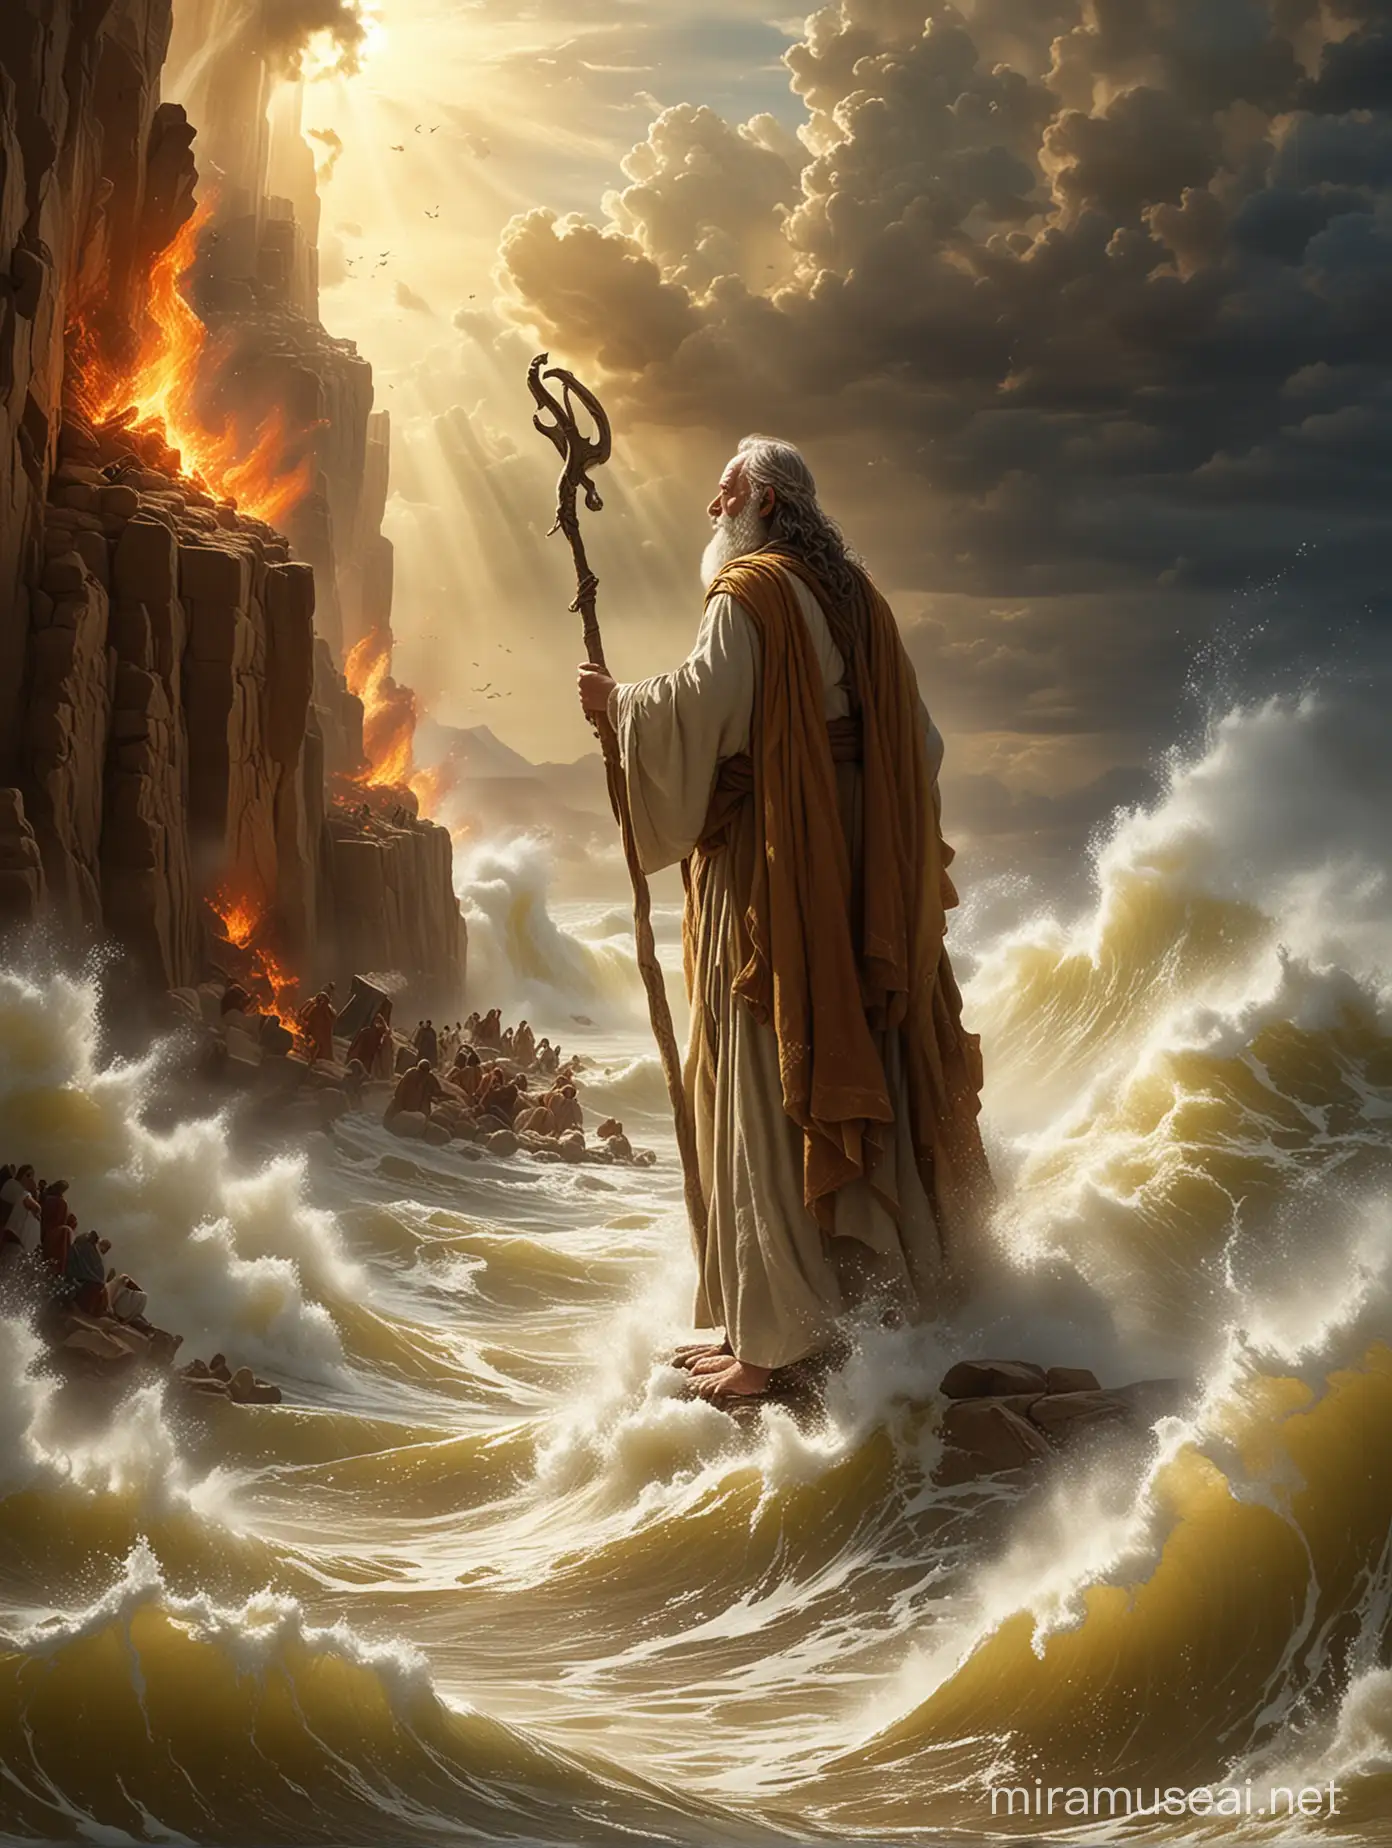 Prophet Moses Parting the Sea with Israelites Guided by Divine Light